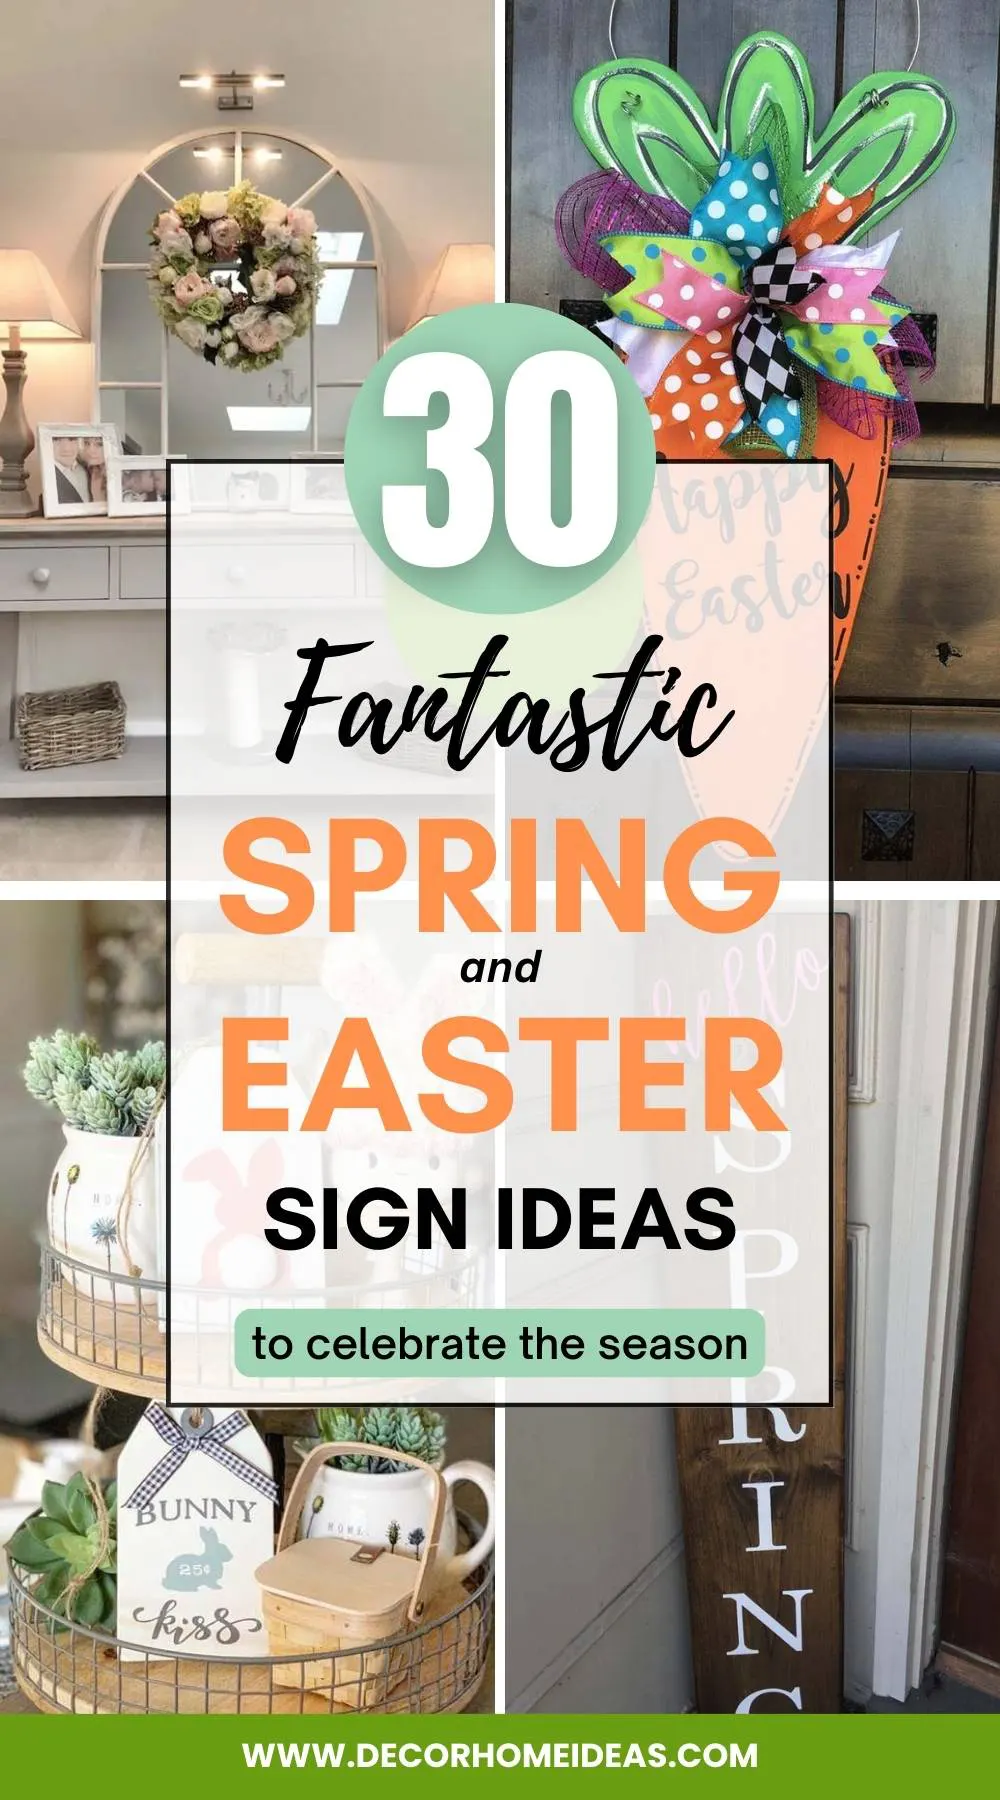 Spring and Easter sign ideas offer creative ways to decorate your home and add a touch of seasonal charm to your space. From rustic wooden signs to colorful banners, these ideas are a fun and easy way to celebrate the arrival of spring and the Easter holiday with family and friends.